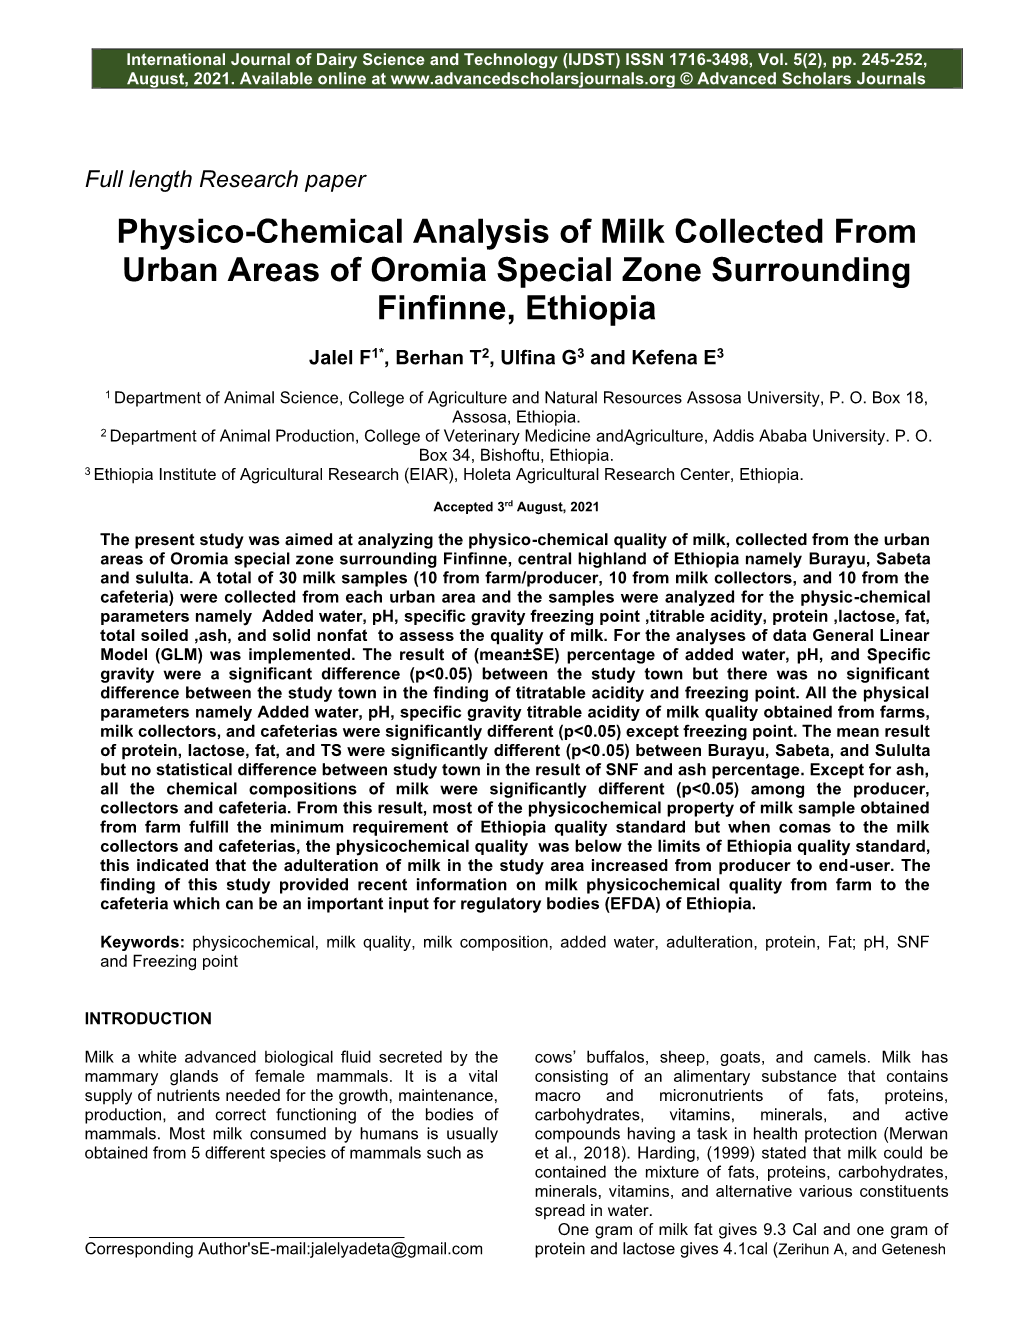 Physico-Chemical Analysis of Milk Collected from Urban Areas of Oromia Special Zone Surrounding Finfinne, Ethiopia